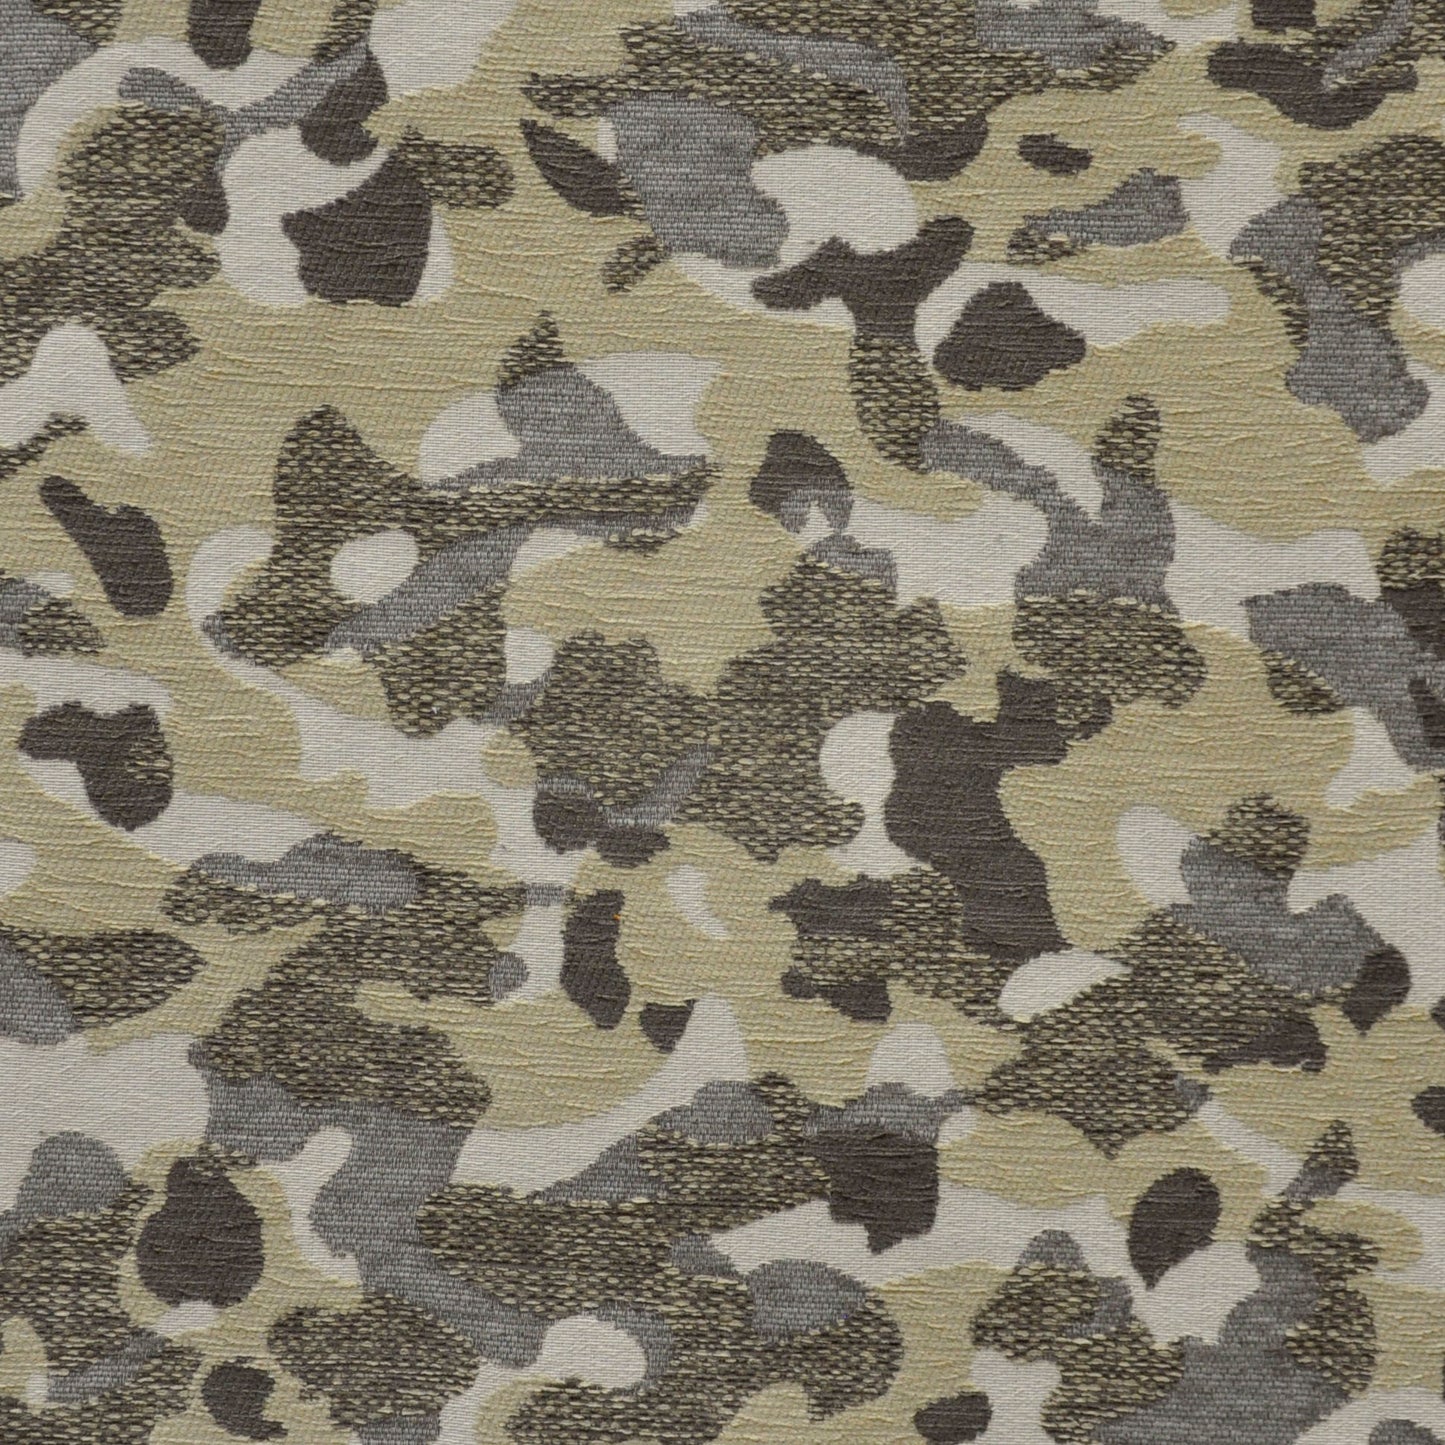 Purchase Maxwell Fabric - Topography, # 820 Bunker